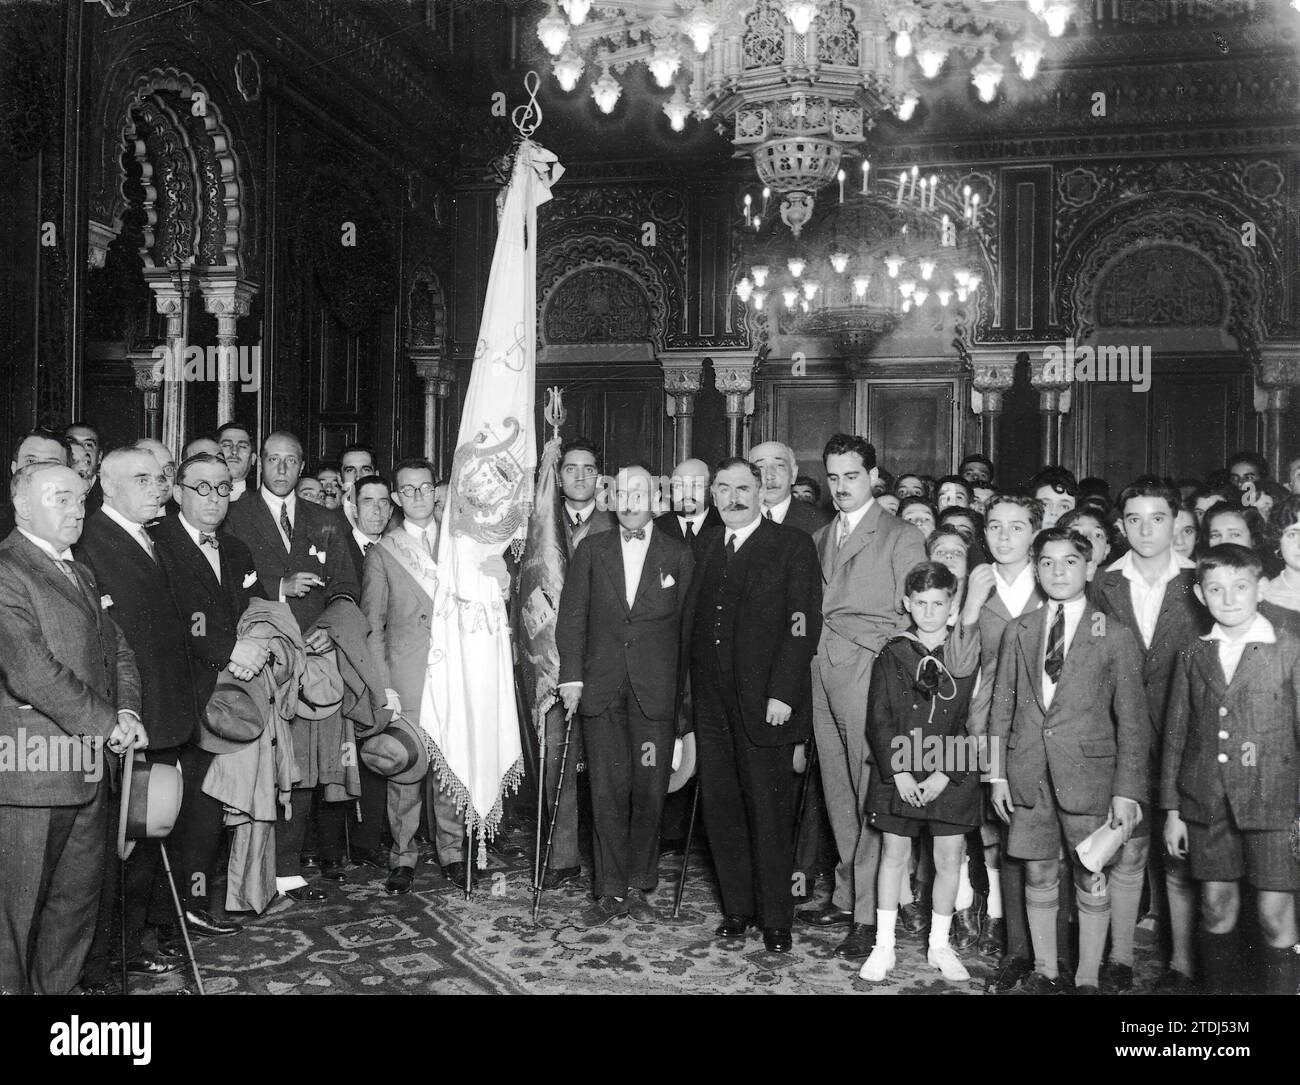 09/30/1926. Bilbao in the assembly hall of the town hall Arrival of the Santander choir group that was received by the mayor. Credit: Album / Archivo ABC / Espiga Stock Photo